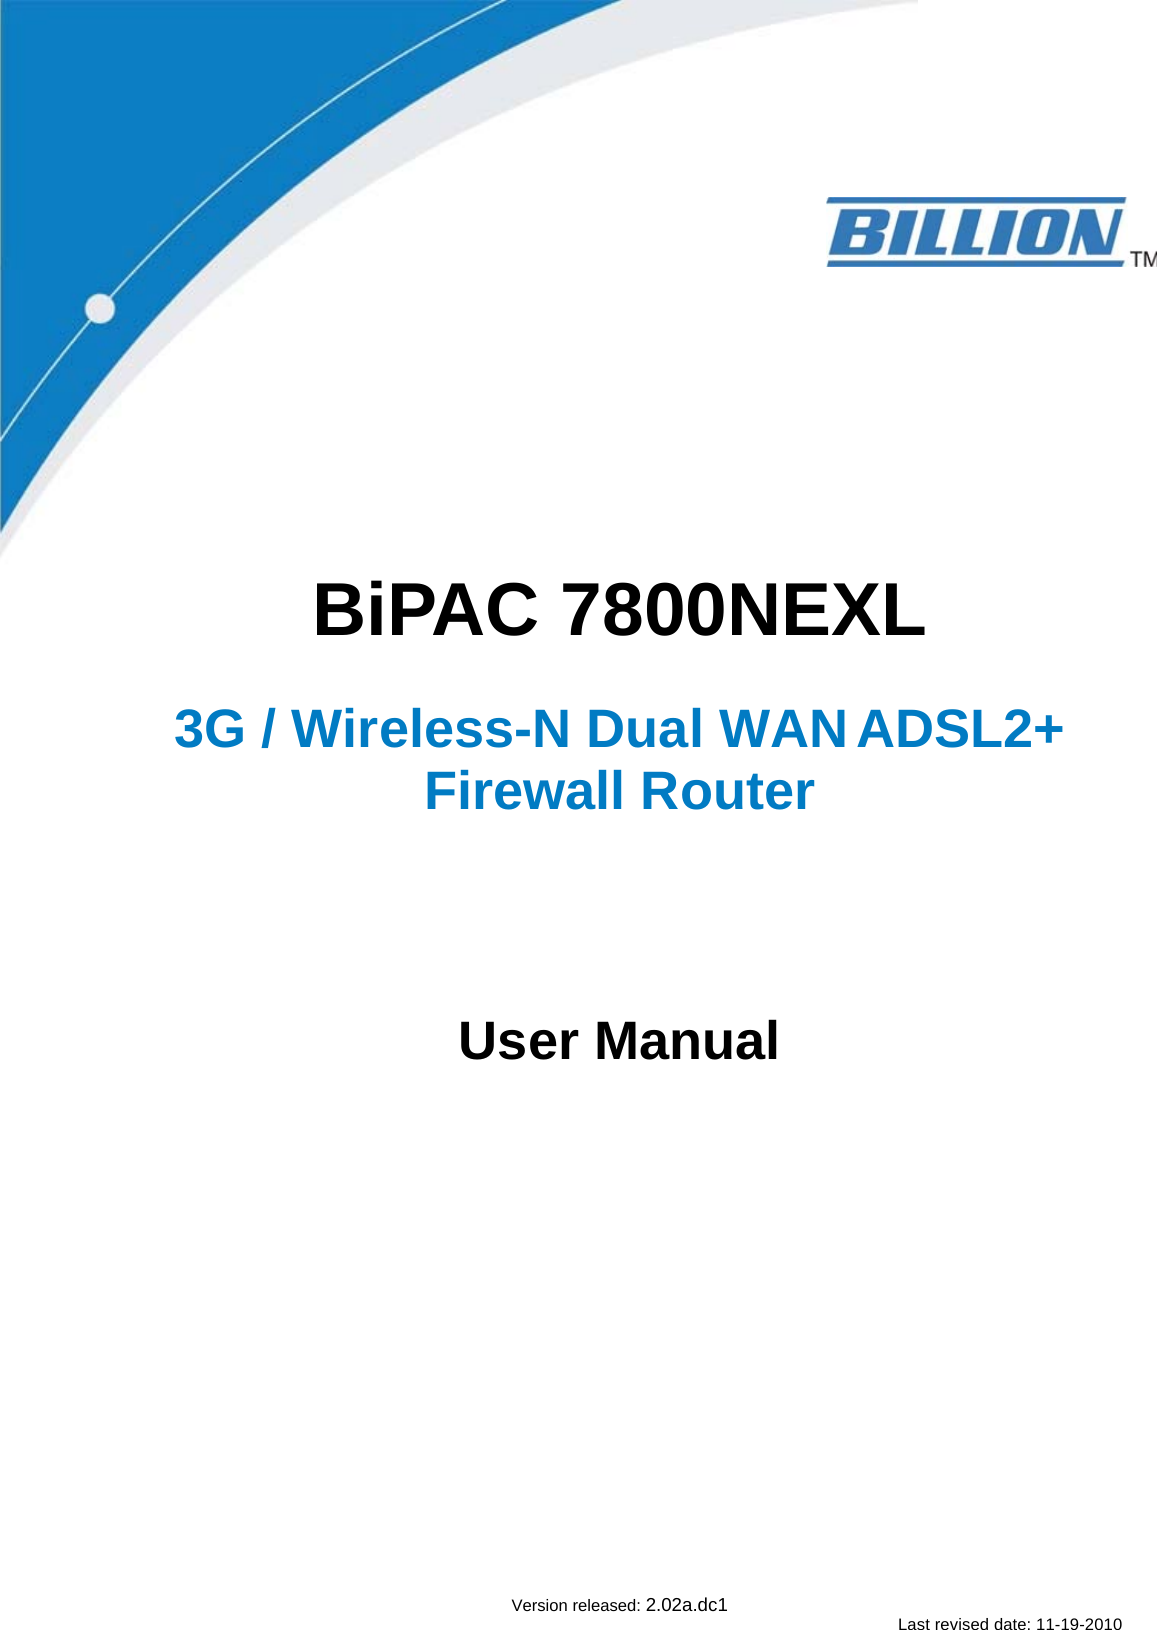                 BiPAC 7800NEXL   3G / Wireless-N Dual WAN ADSL2+ Firewall Router          User Manual                          Version released: 2.02a.dc1 Last revised date: 11-19-2010 